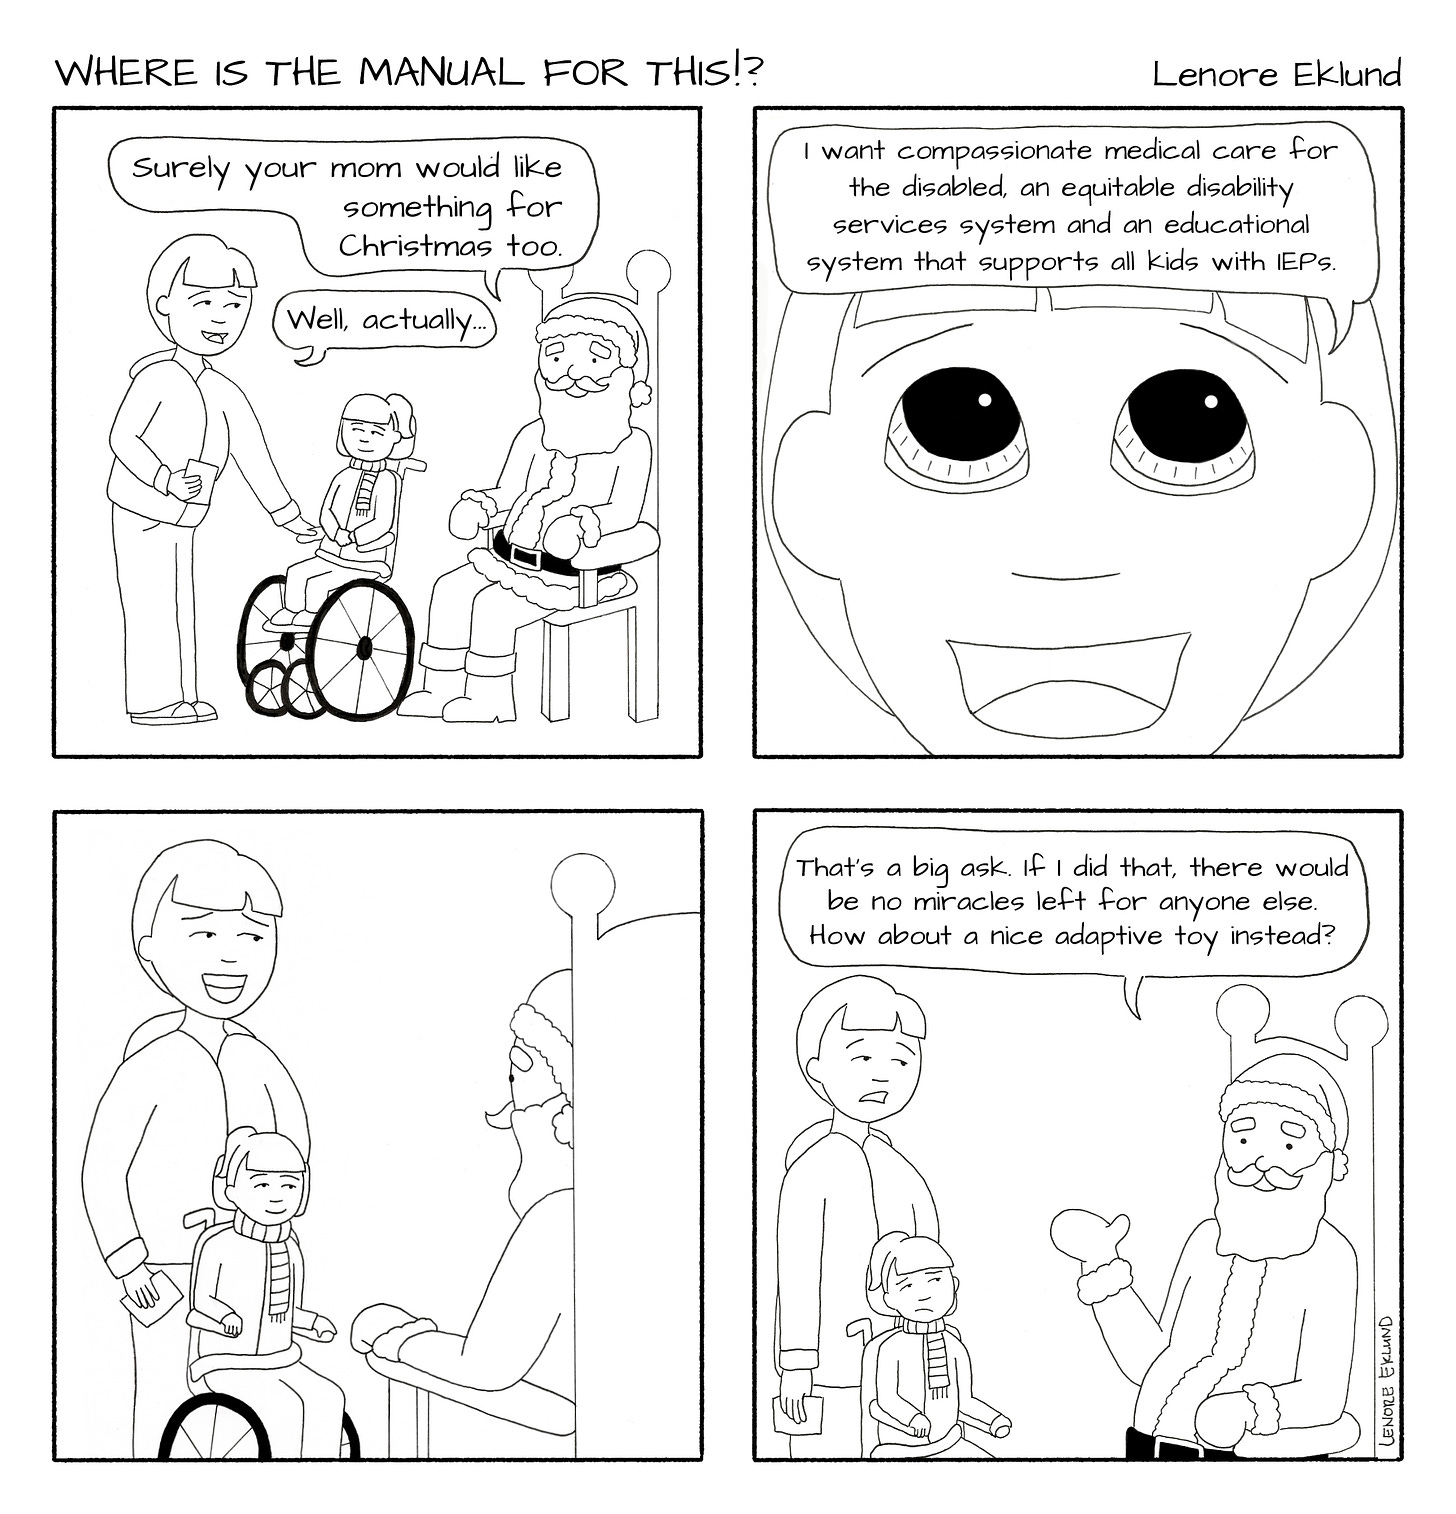 A four-panel line drawing cartoon titled Where is the Manual for This!? by Lenore Eklund. The first panel shows a mom and her daughter in a wheelchair facing a seated Santa. “Surely your mom would like something for Christmas too,” Santa says. “Well, actually…,” the mom starts to say. The second panels shows a close-up with the mom’s face with pleading eyes and reads: “I want compassionate medical care for the disabled, an equitable disability services system and an educational system that supports all kids with IEPs.” The third panel shows the mom and daughter smiling expectantly at Santa. In the fourth panel, Santa says: “That’s a big ask. If I did that, there would be no miracles left for anyone else. How about a nice adaptive toy instead?” The mom and daughter are dismayed. 